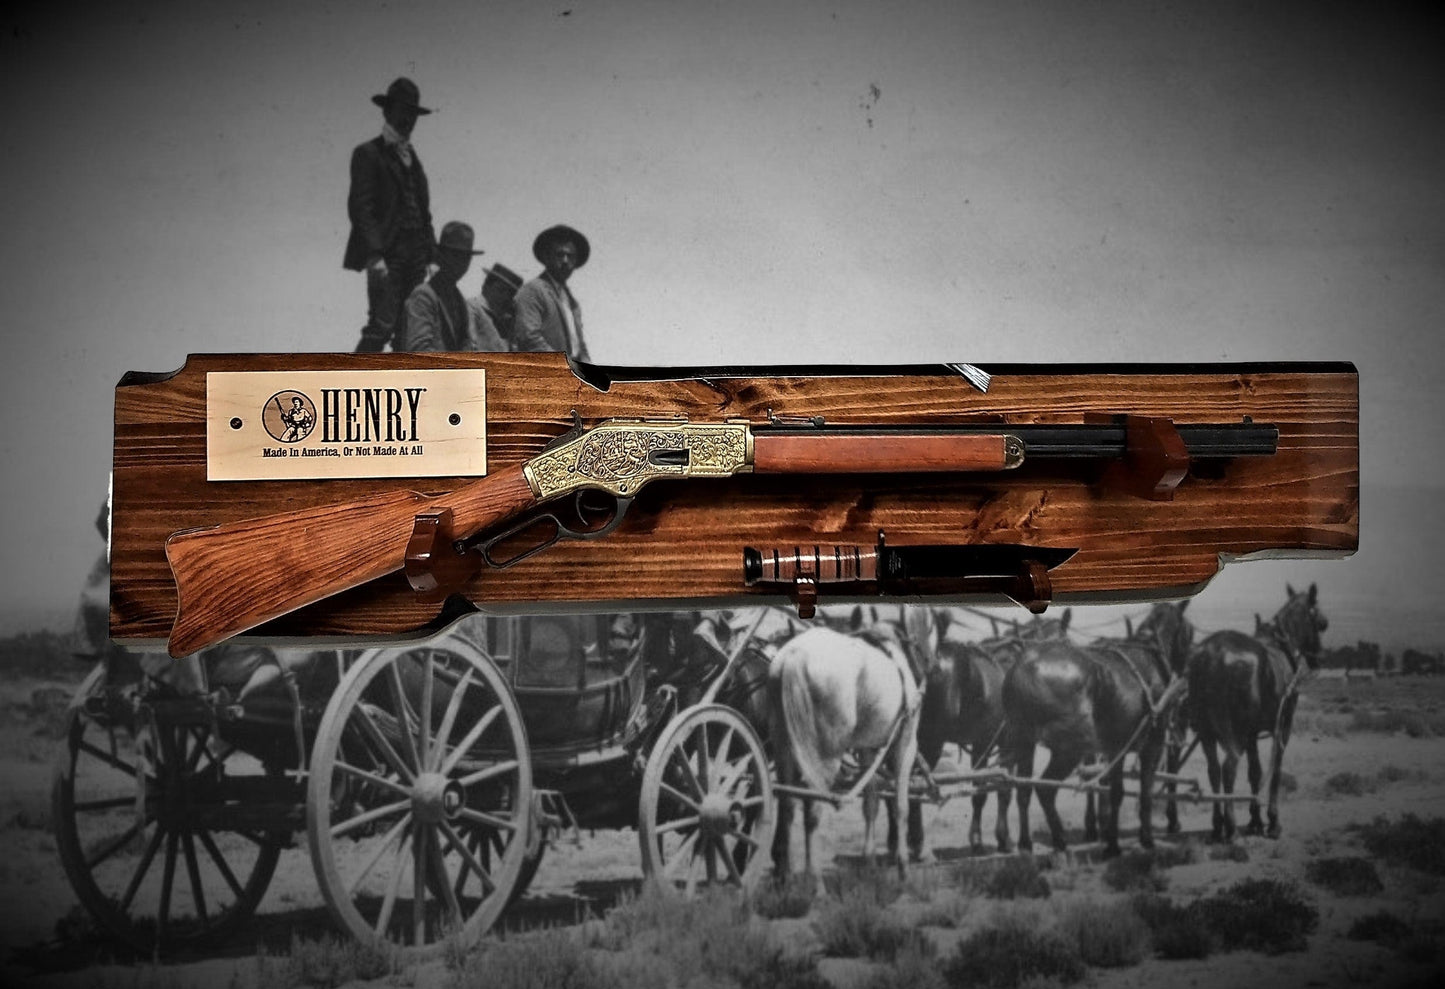 walkerwoodgifts Rustic Knotty Pine Henry Gun Rack Display For Lever Action Rifle Faux Live Edge Bullet Hangers Cabin Décor Collectors Gift